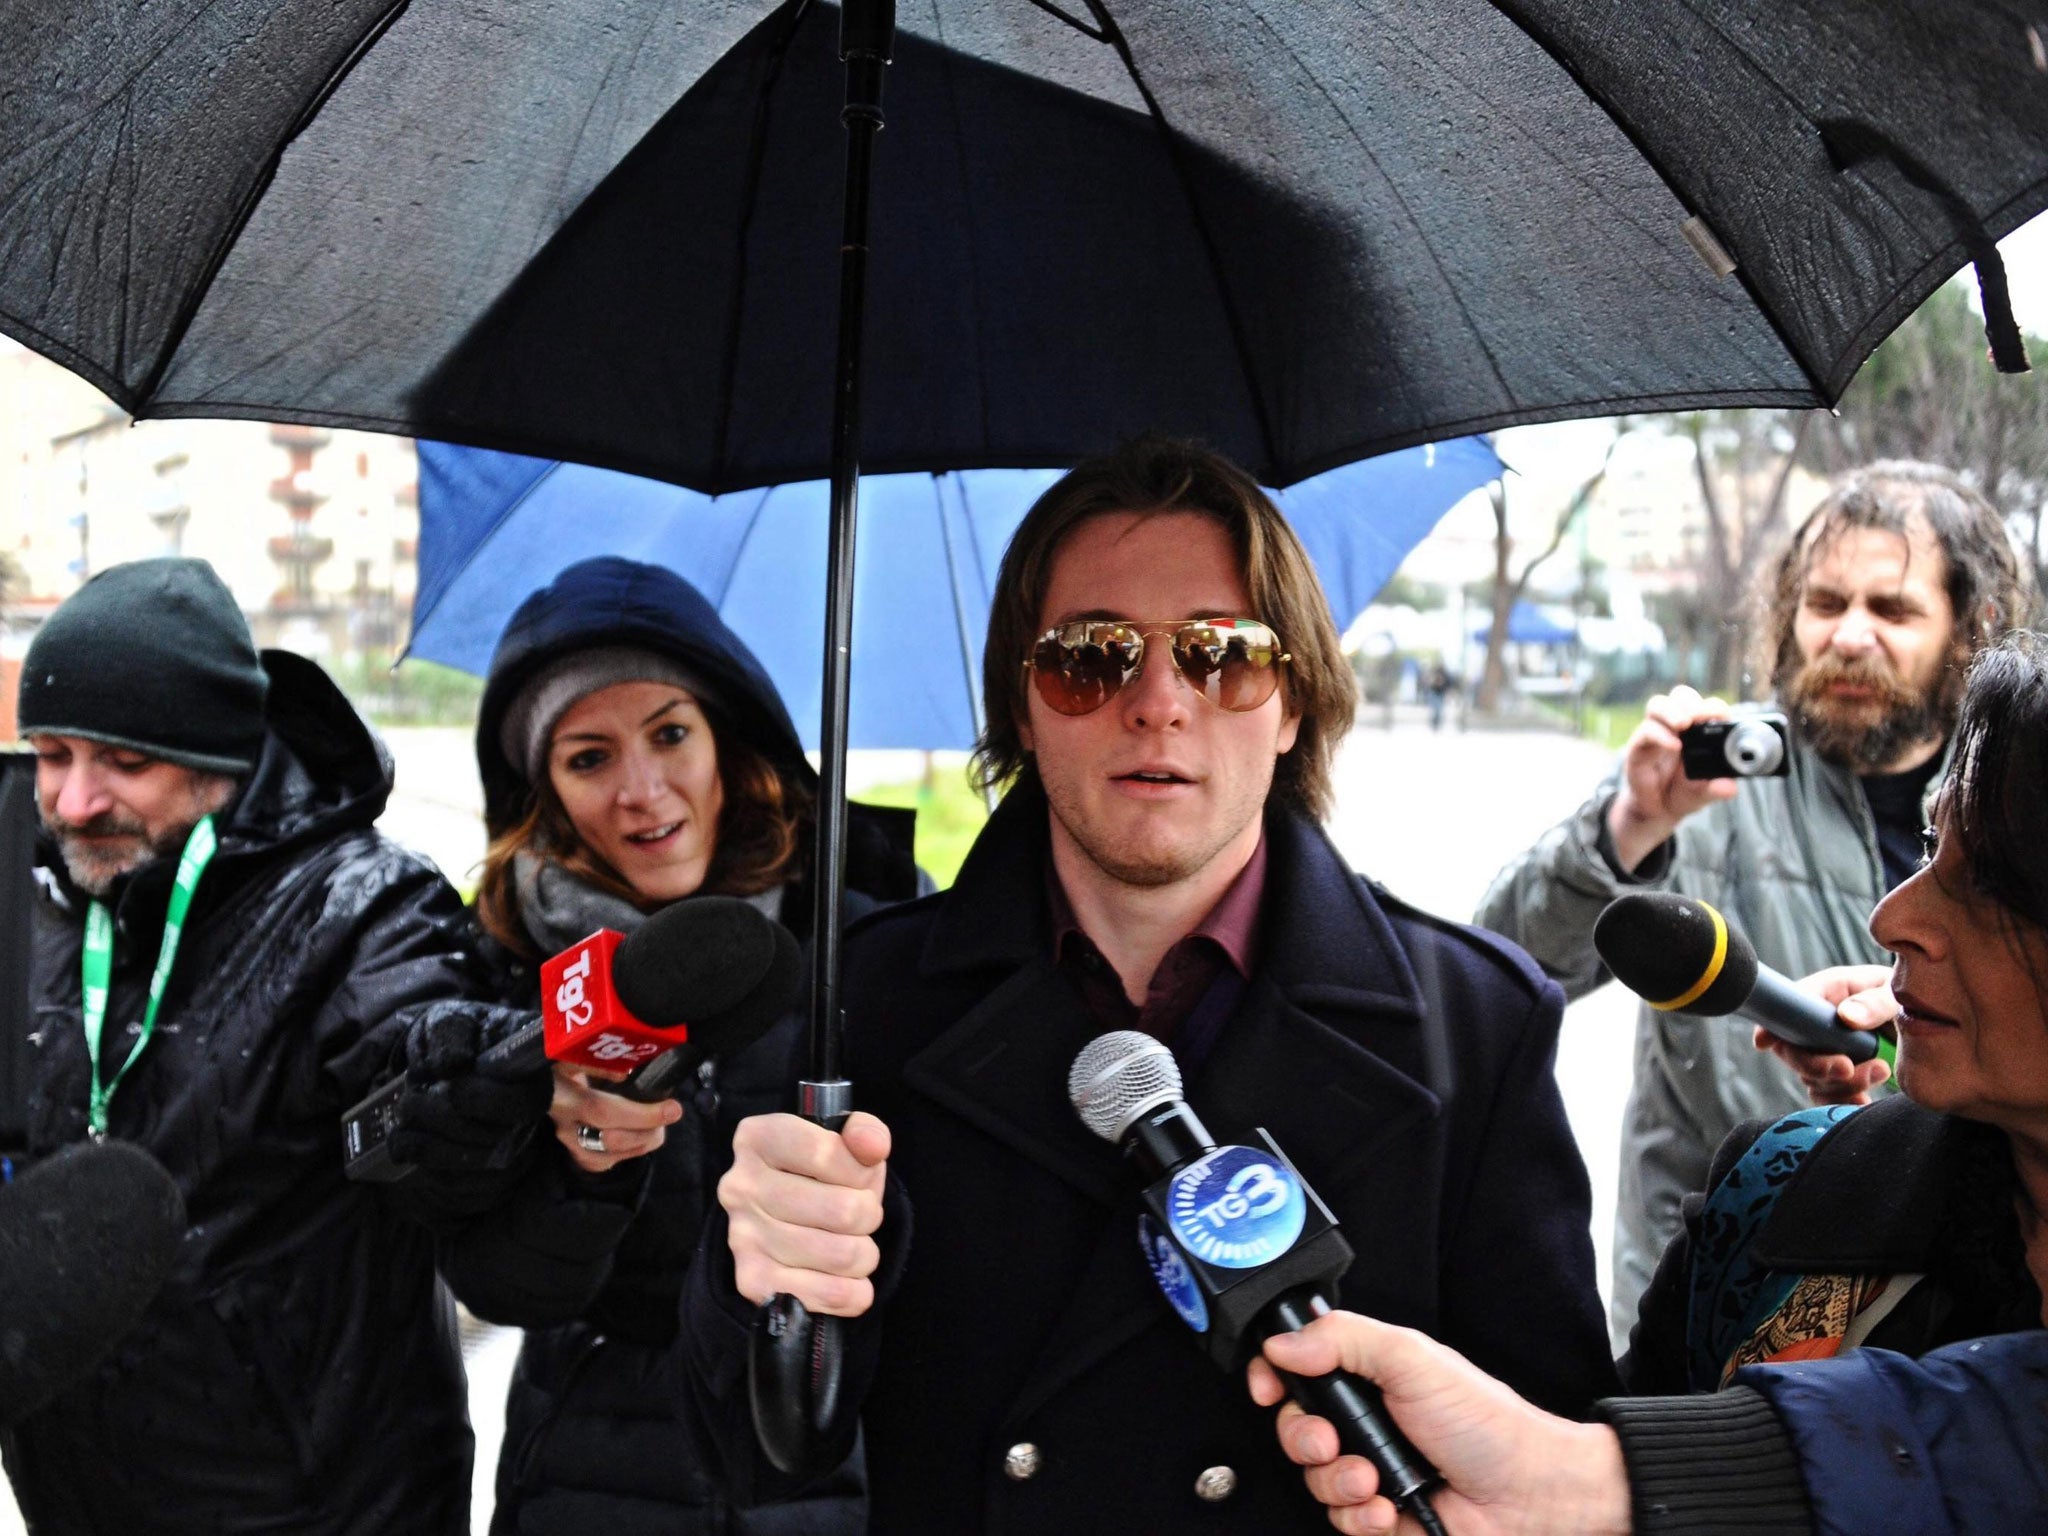 Raffaele Sollecito has been found to be guilty, along with Amanda Knox of murdering Meridith Kercher